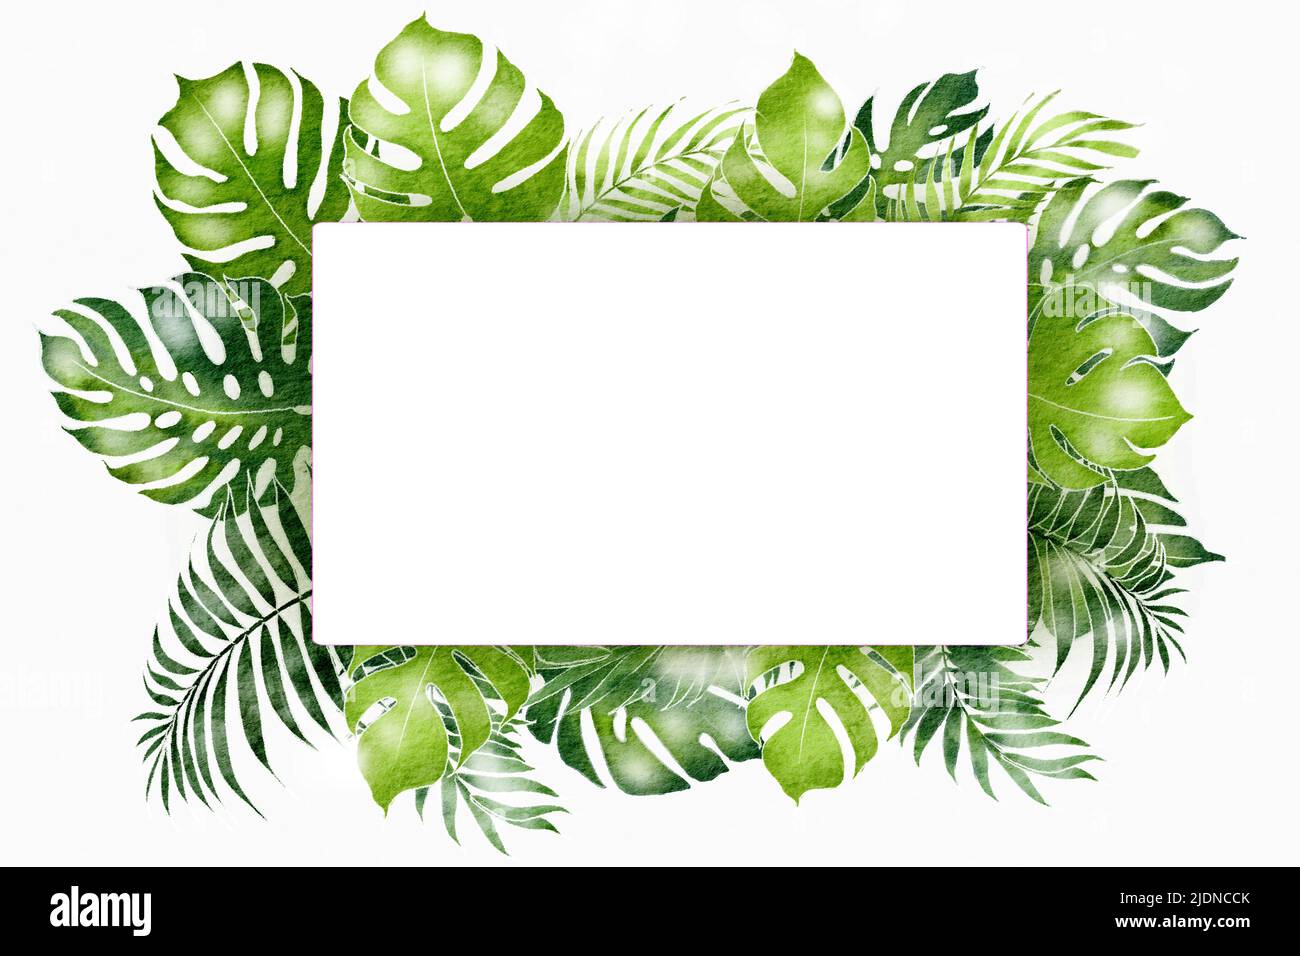 natural frame watercolor background in green with leaf border on white Stock Photo